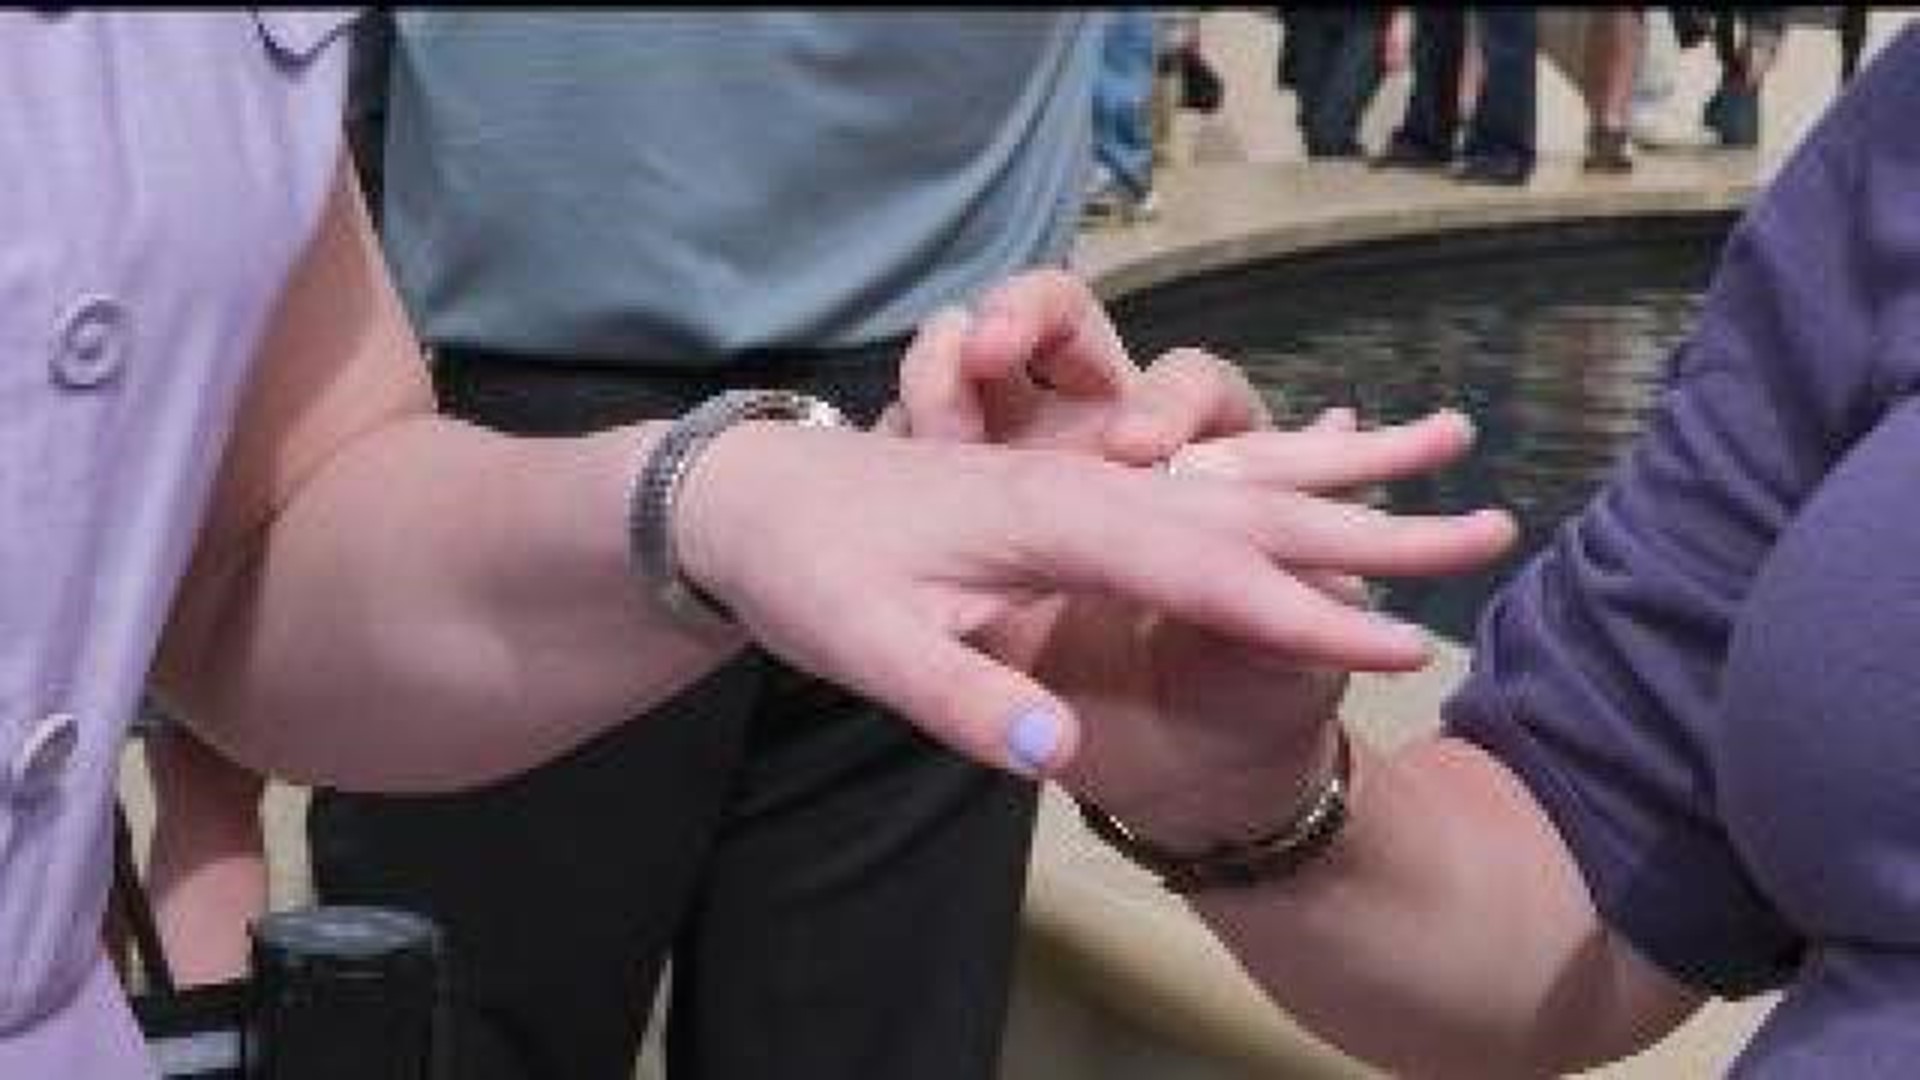 Same-sex couples can marry in Illinois